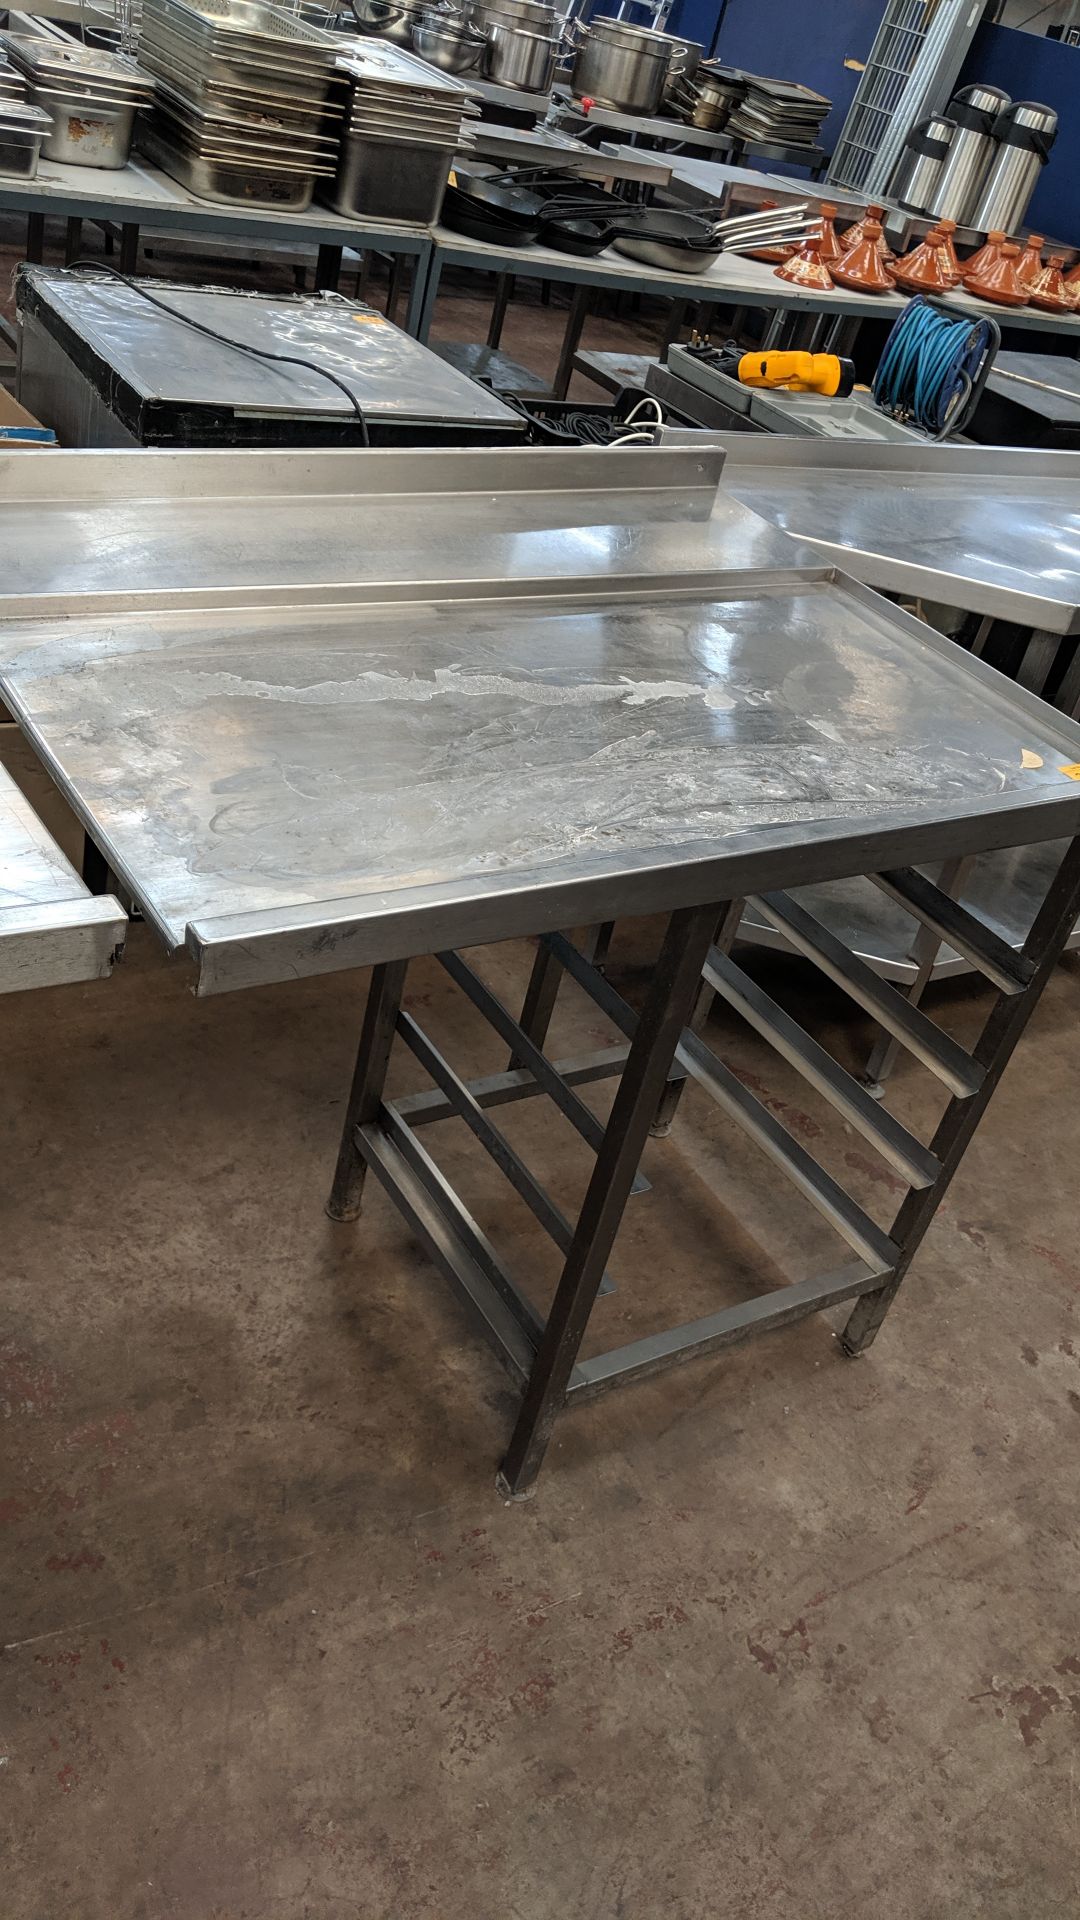 Stainless steel feeder table for use with commercial dishwasher, including tray store below - Image 2 of 3